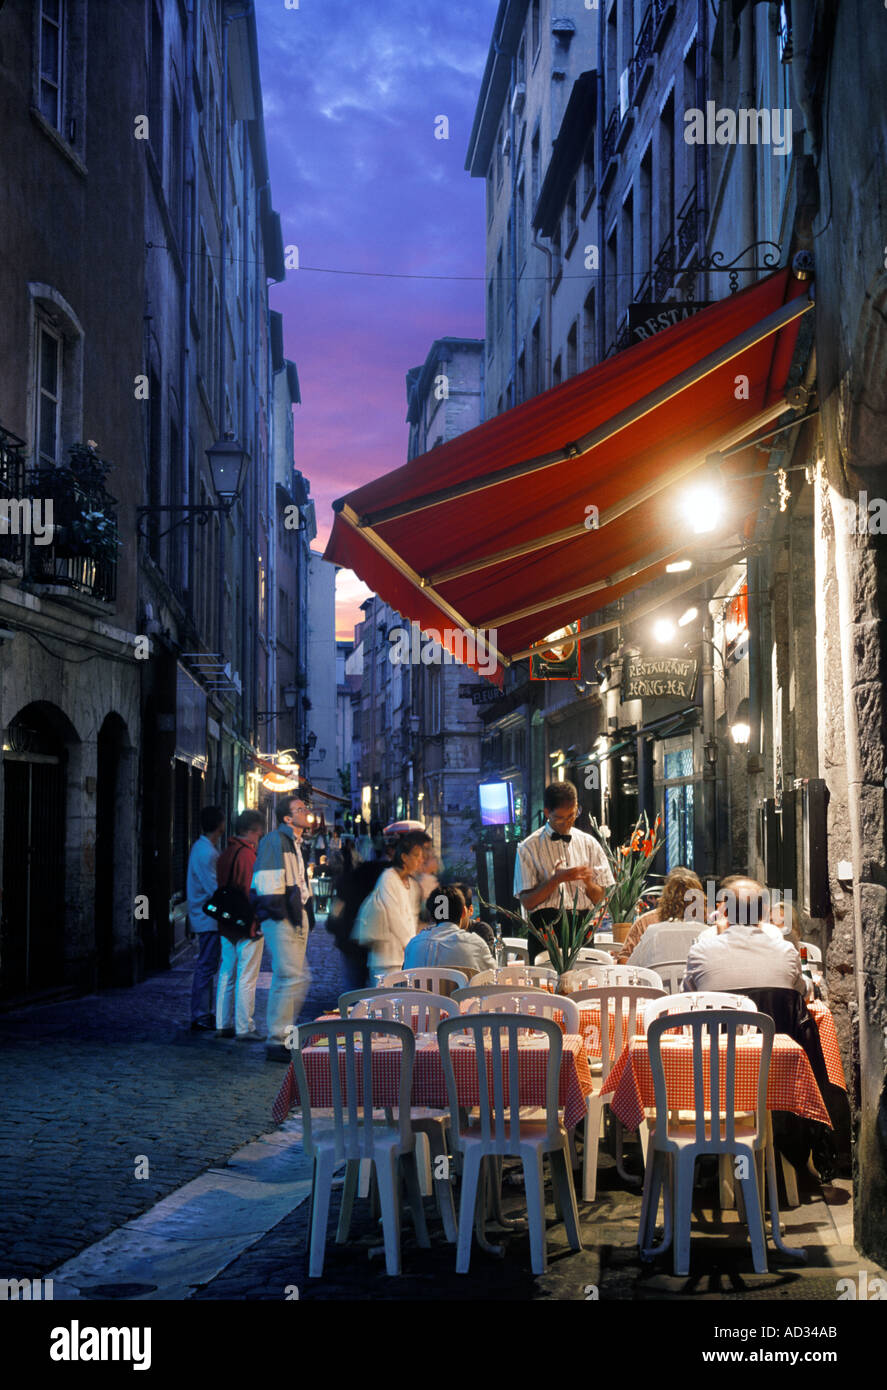 RUE ST JEAN IN THE OLD LYON FRANCE Stock Photo